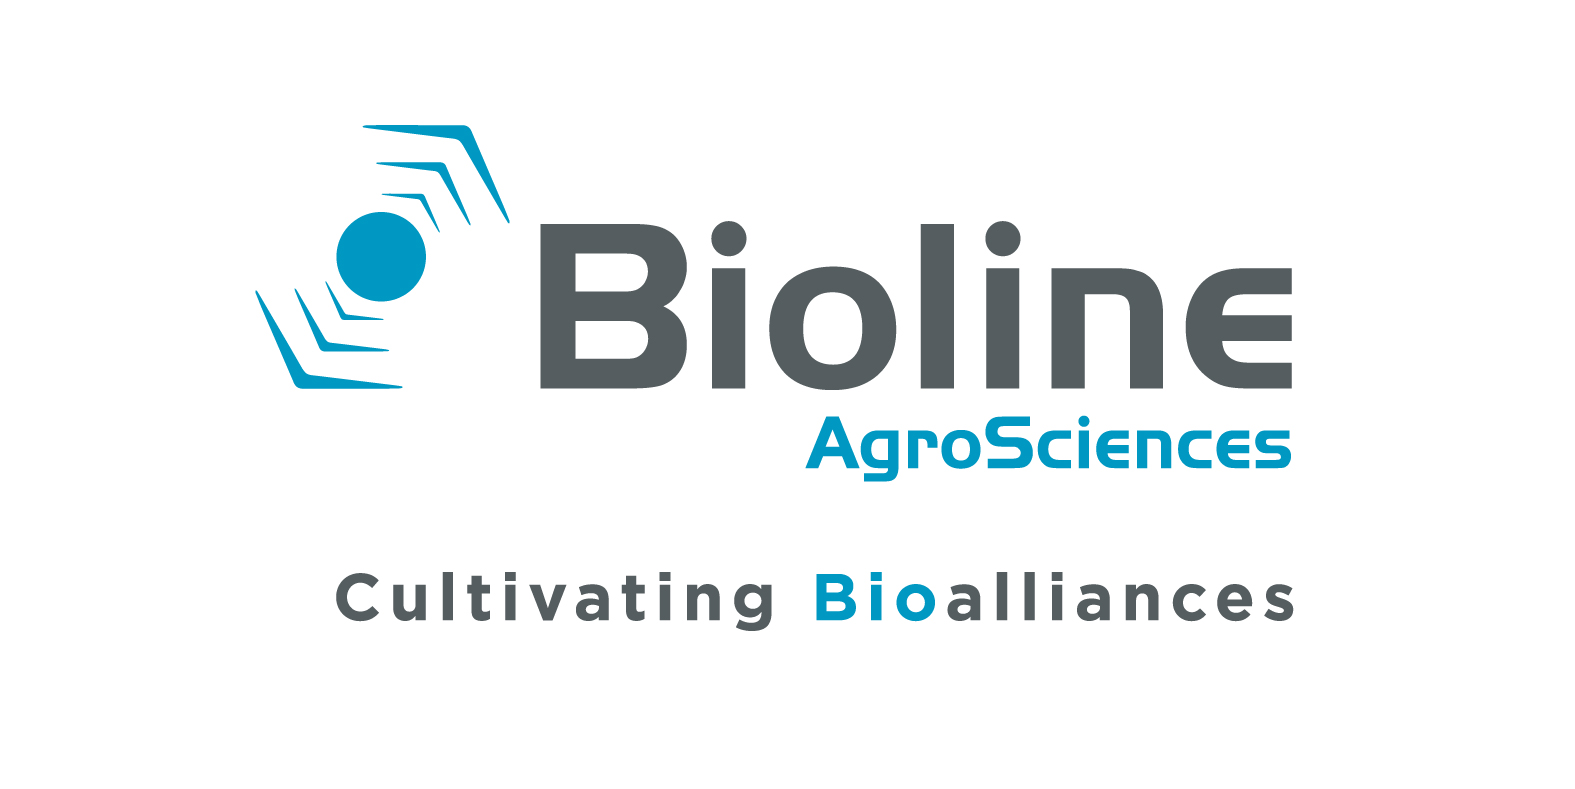 Bioline Agrosciences, Tuesday, February 23, 2021, Press release picture